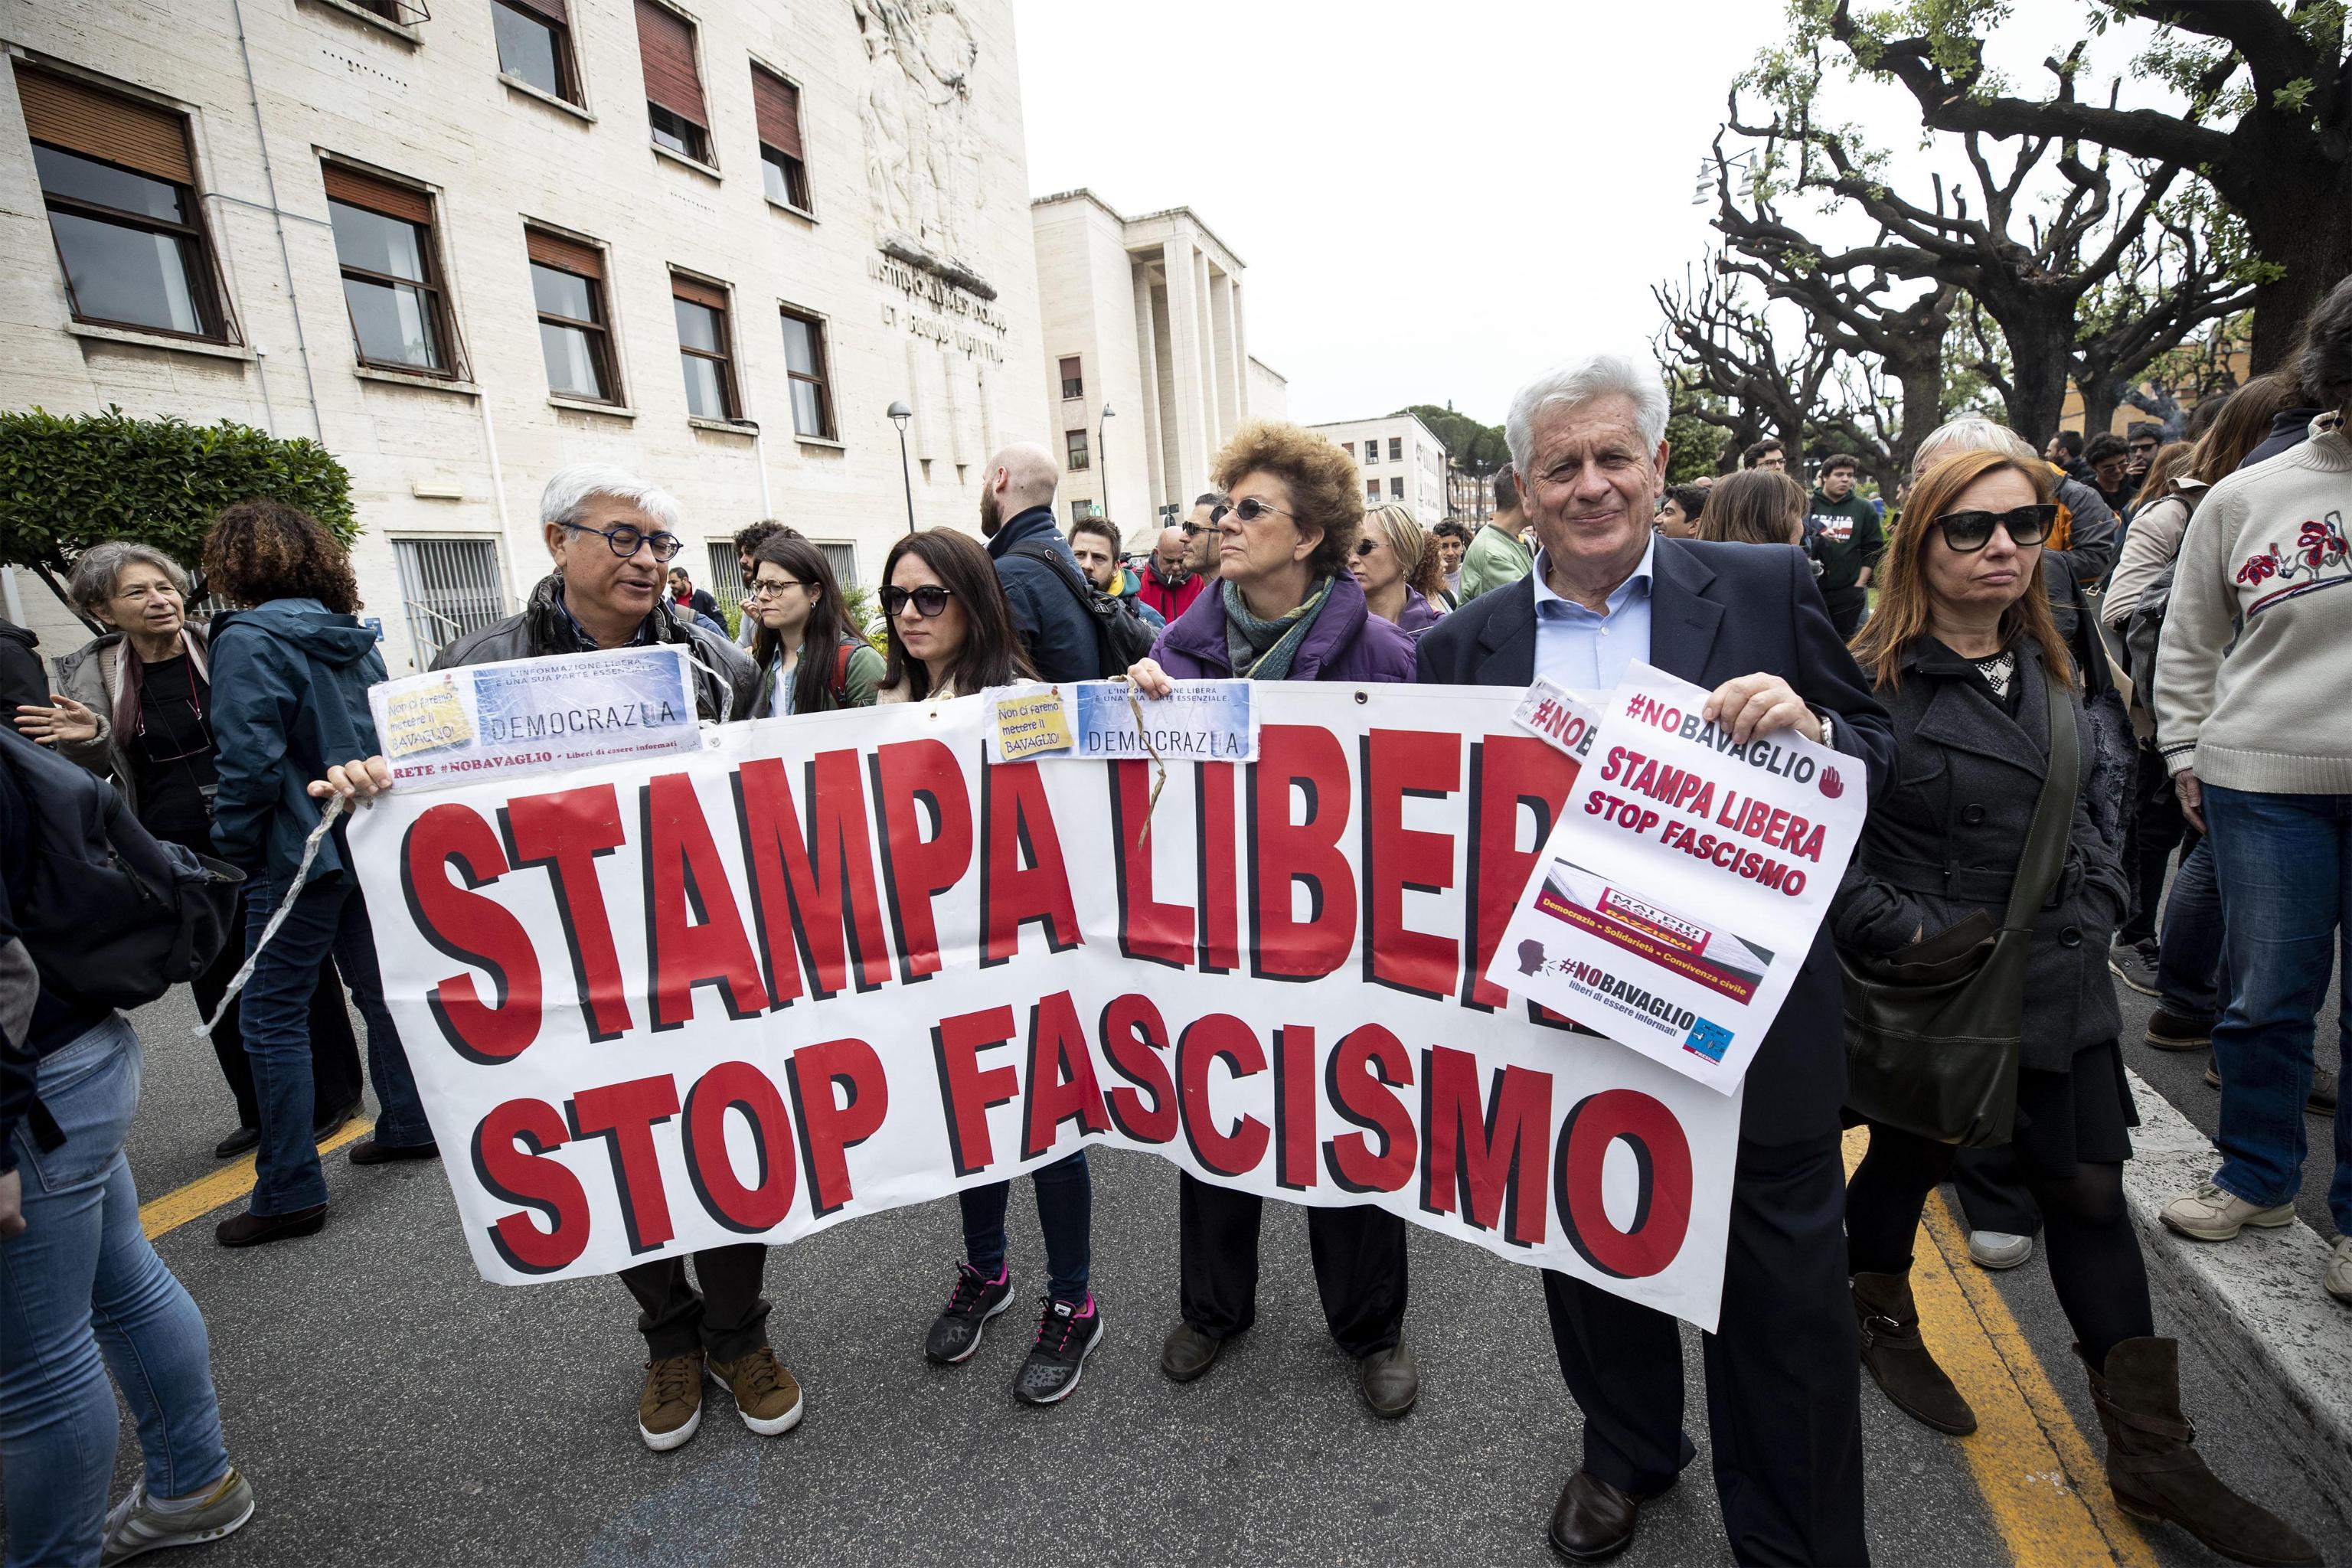 The anti-fascist demonstration awaiting the intervention of Mimmo Lucano, suspended mayor of Riace,  in Aldo Moro square in Rome, Italy, 13 May 2019. With a big banner in his head 